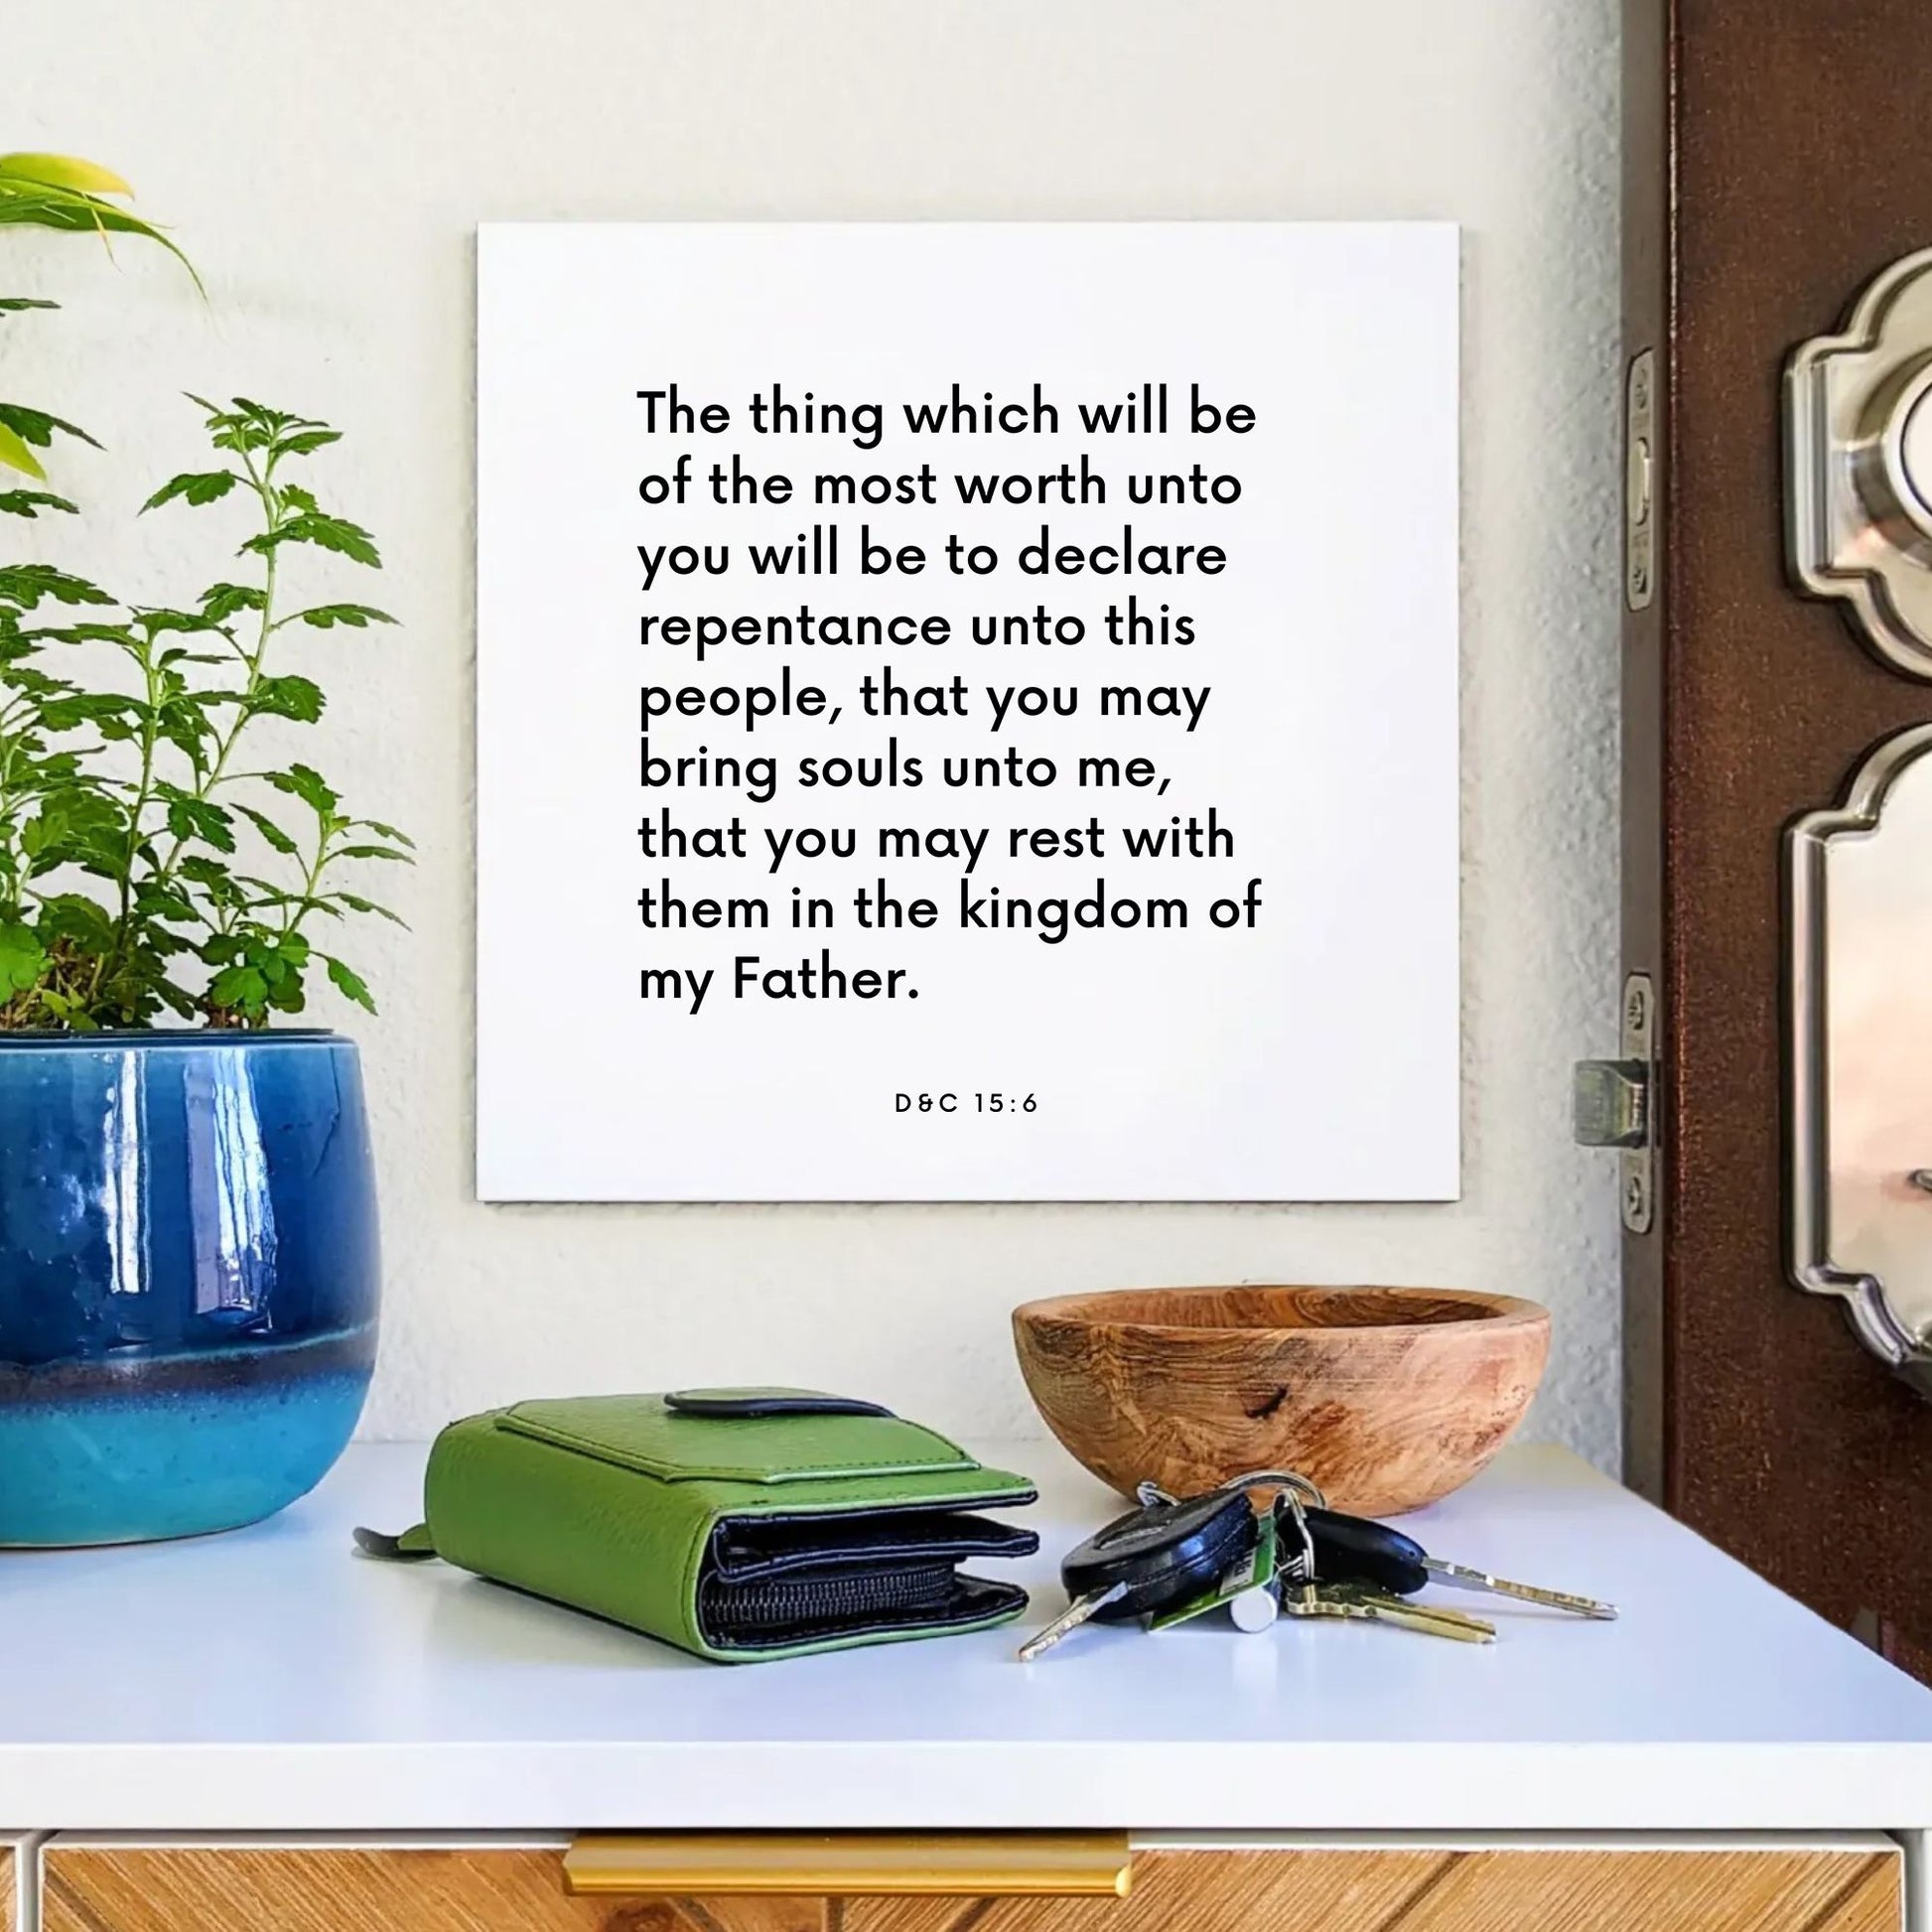 Entryway mouting of the scripture tile for D&C 15:6 - "The thing which will be of the most worth unto you"